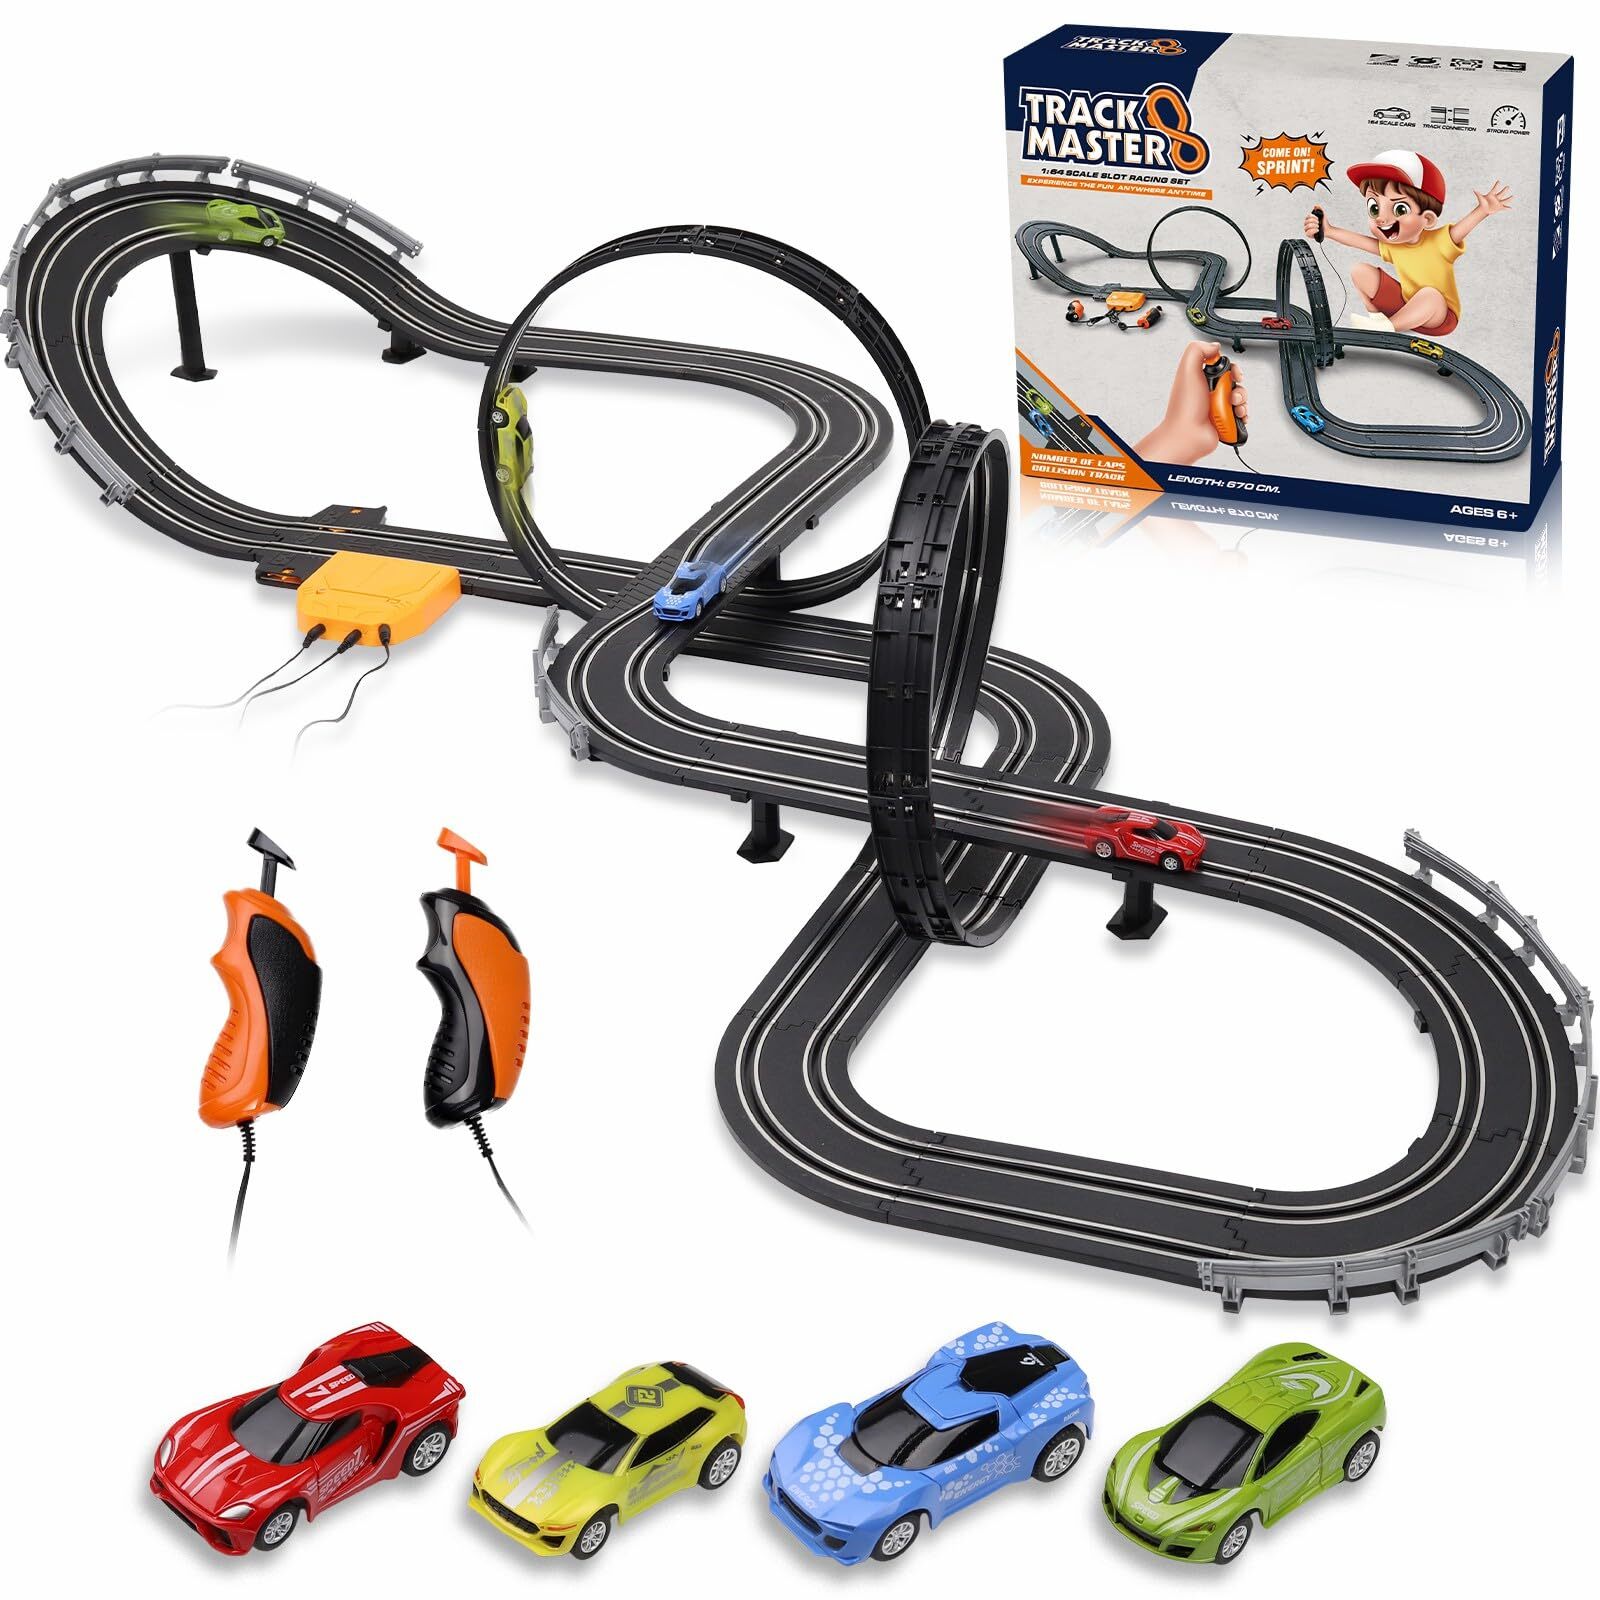 PAFOLO Car Toys for 3 Year Old Slot Car Race Track Toys with 4pcs Speed Cars & 22FT Dual Racing Game Lap Overpass Track - Battery or Electric Race Car Track for Boys Girls Age 4-12